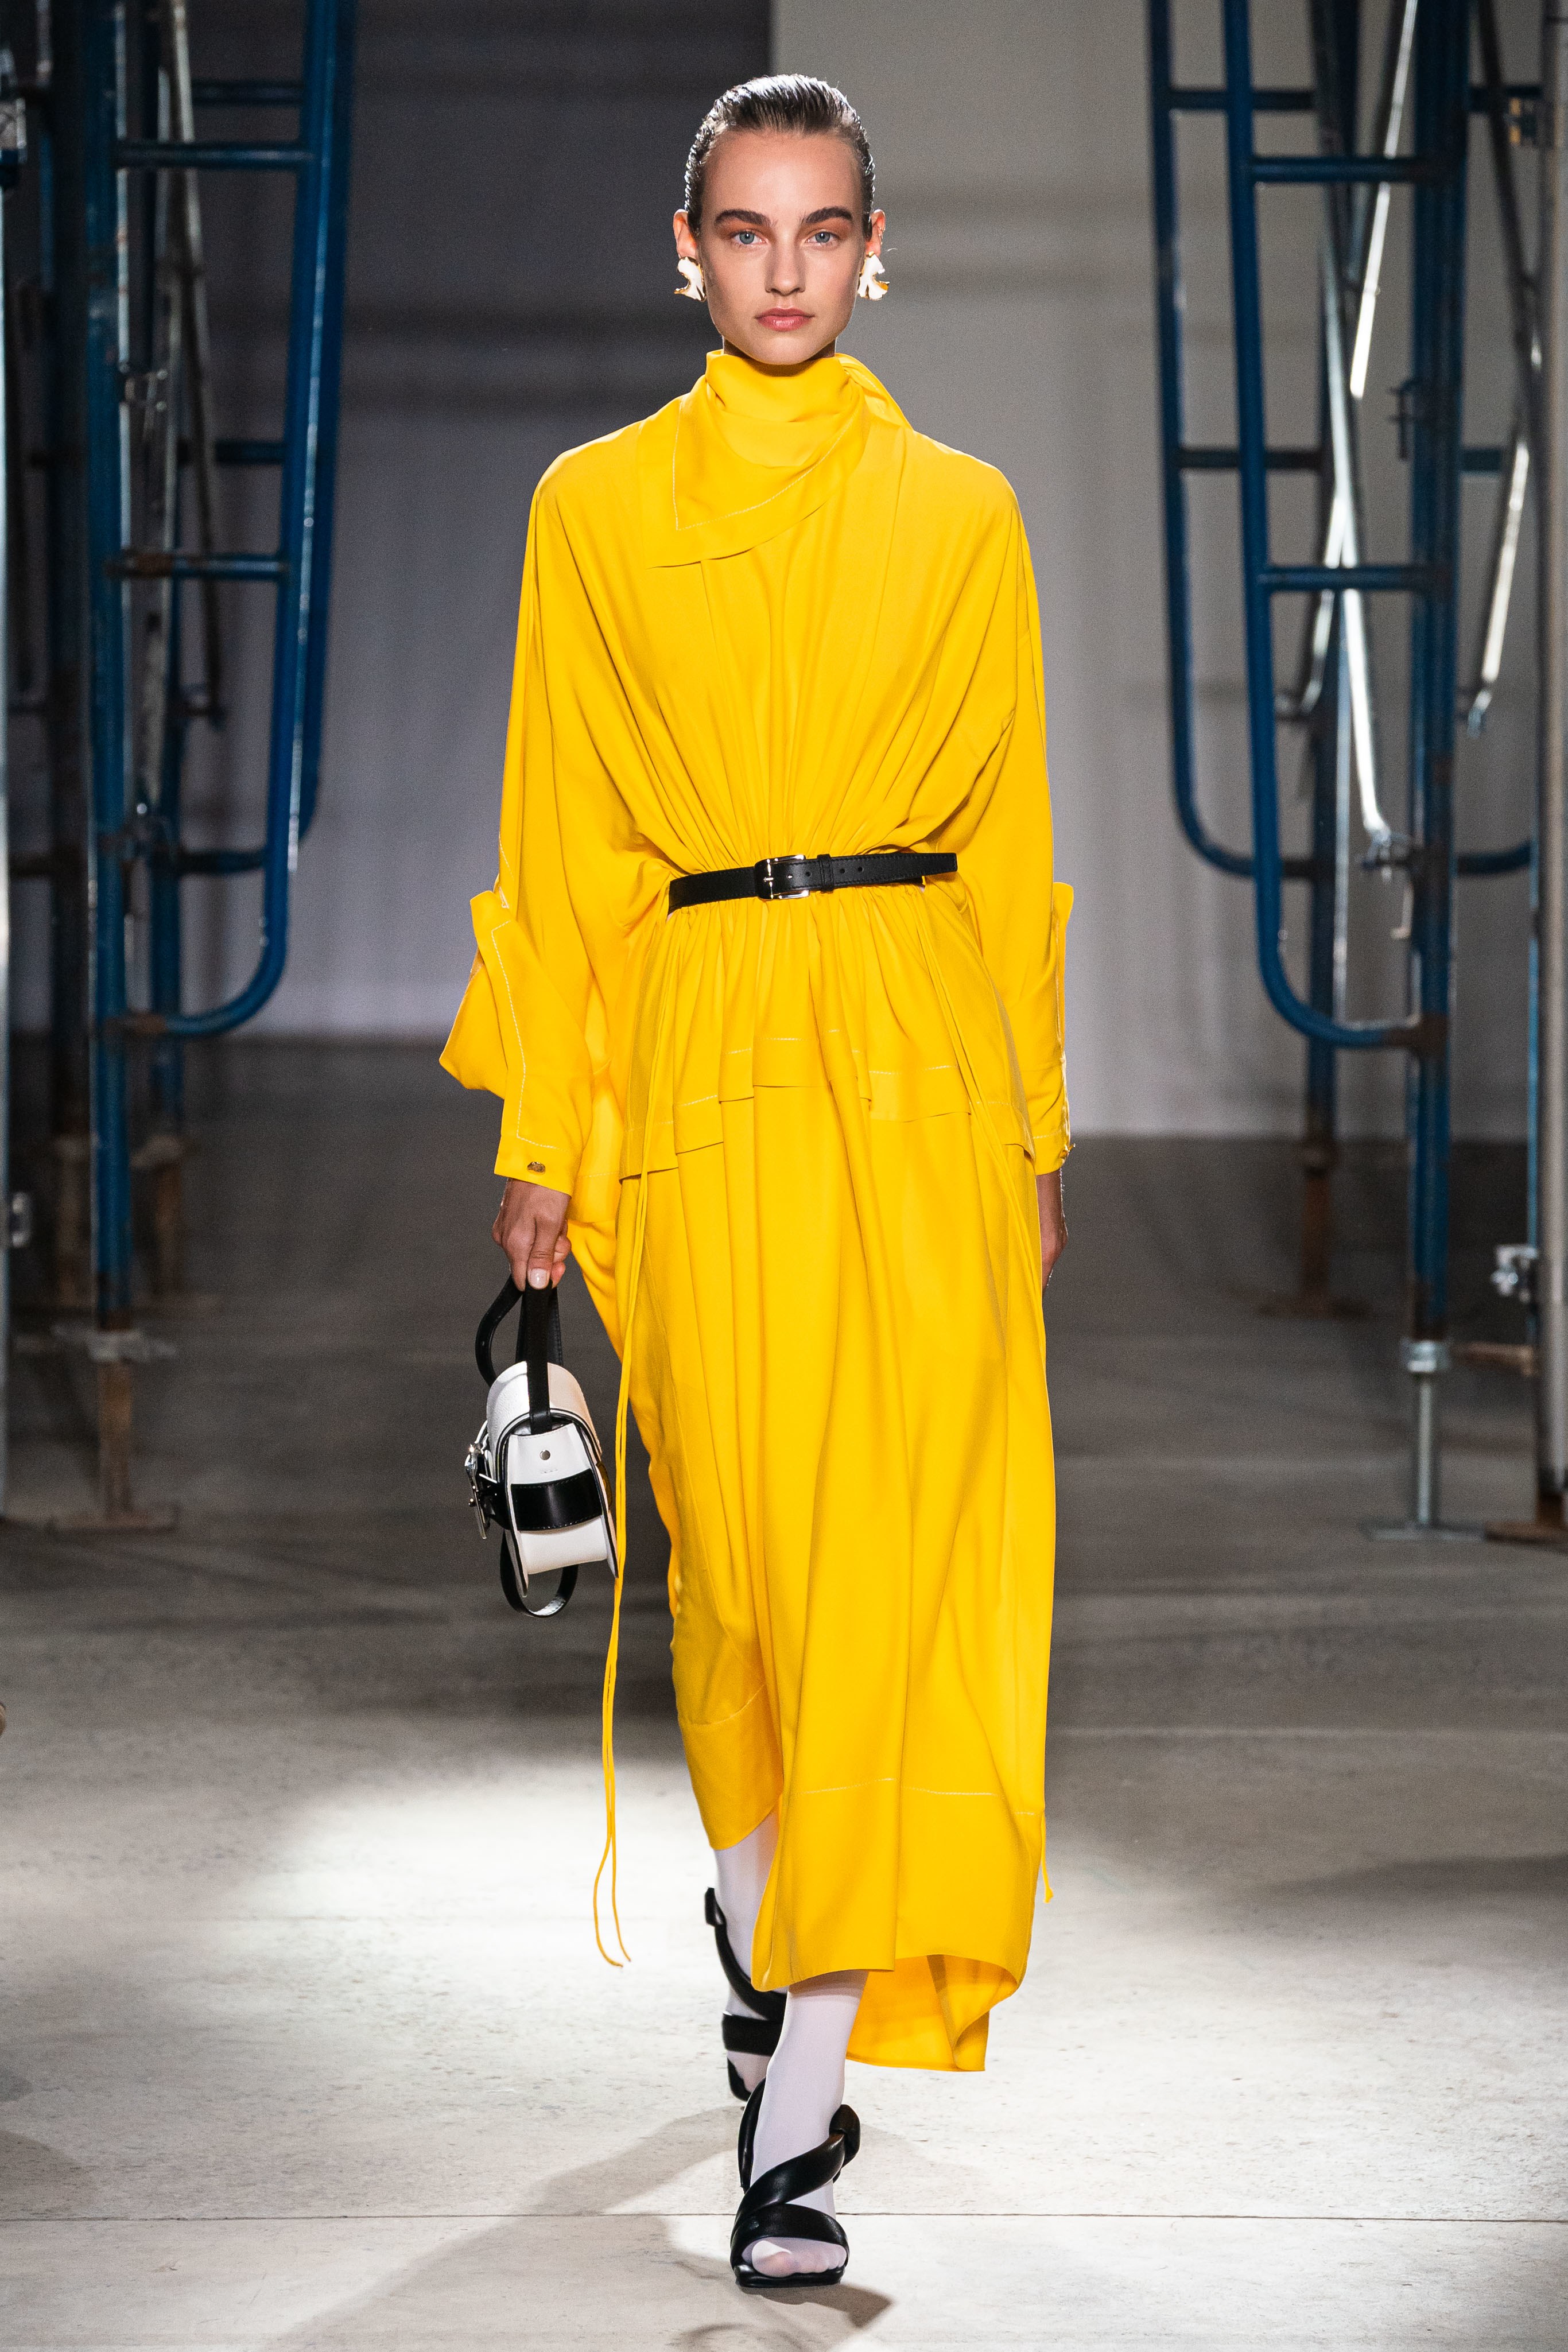 Proenza Schouler Spring Summer 2020 SS2020 trends runway coverage Ready To Wear Vogue yellow monochrome